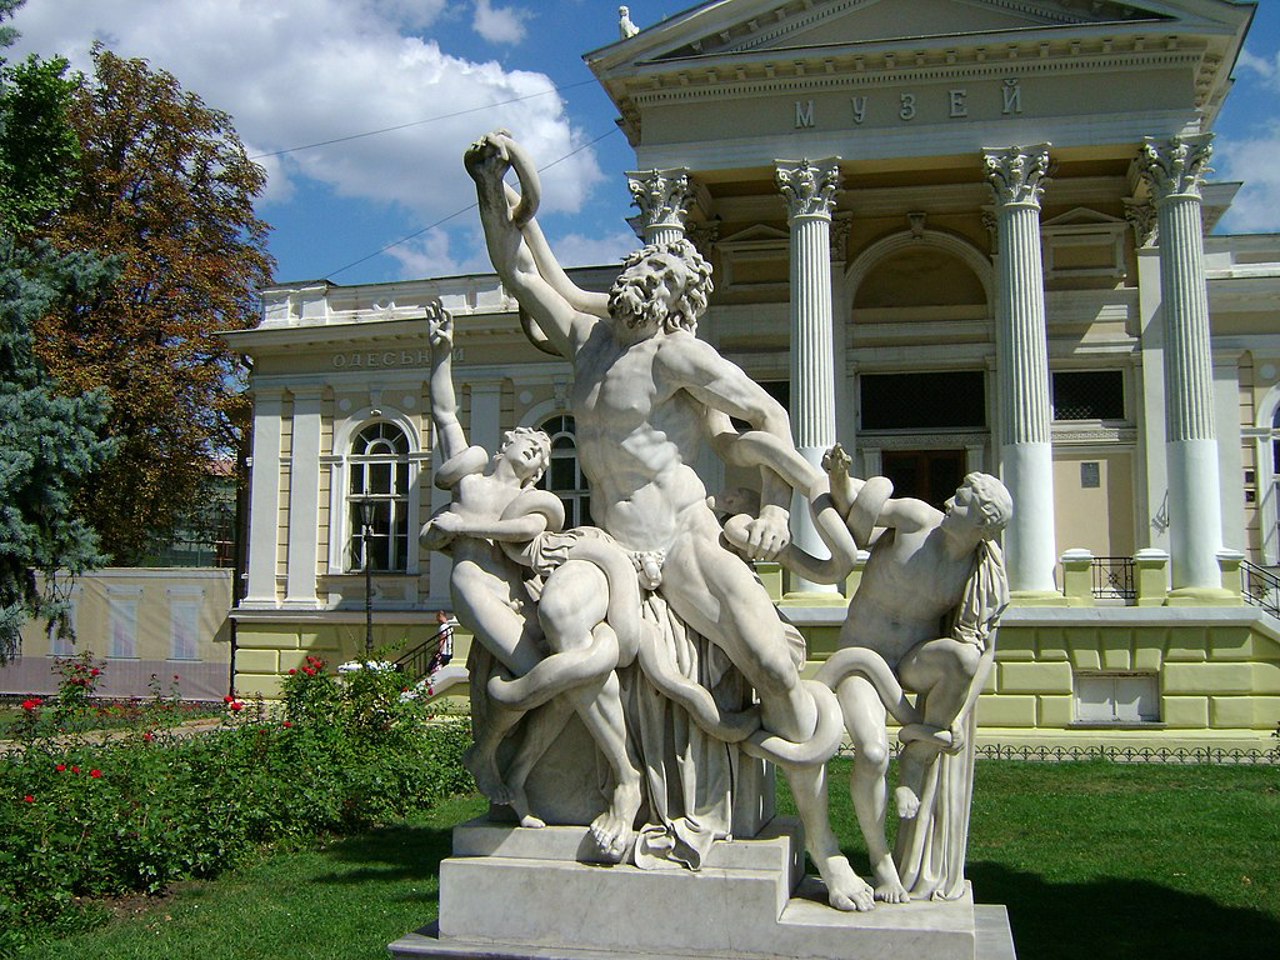 Odesa Archaeological Museum